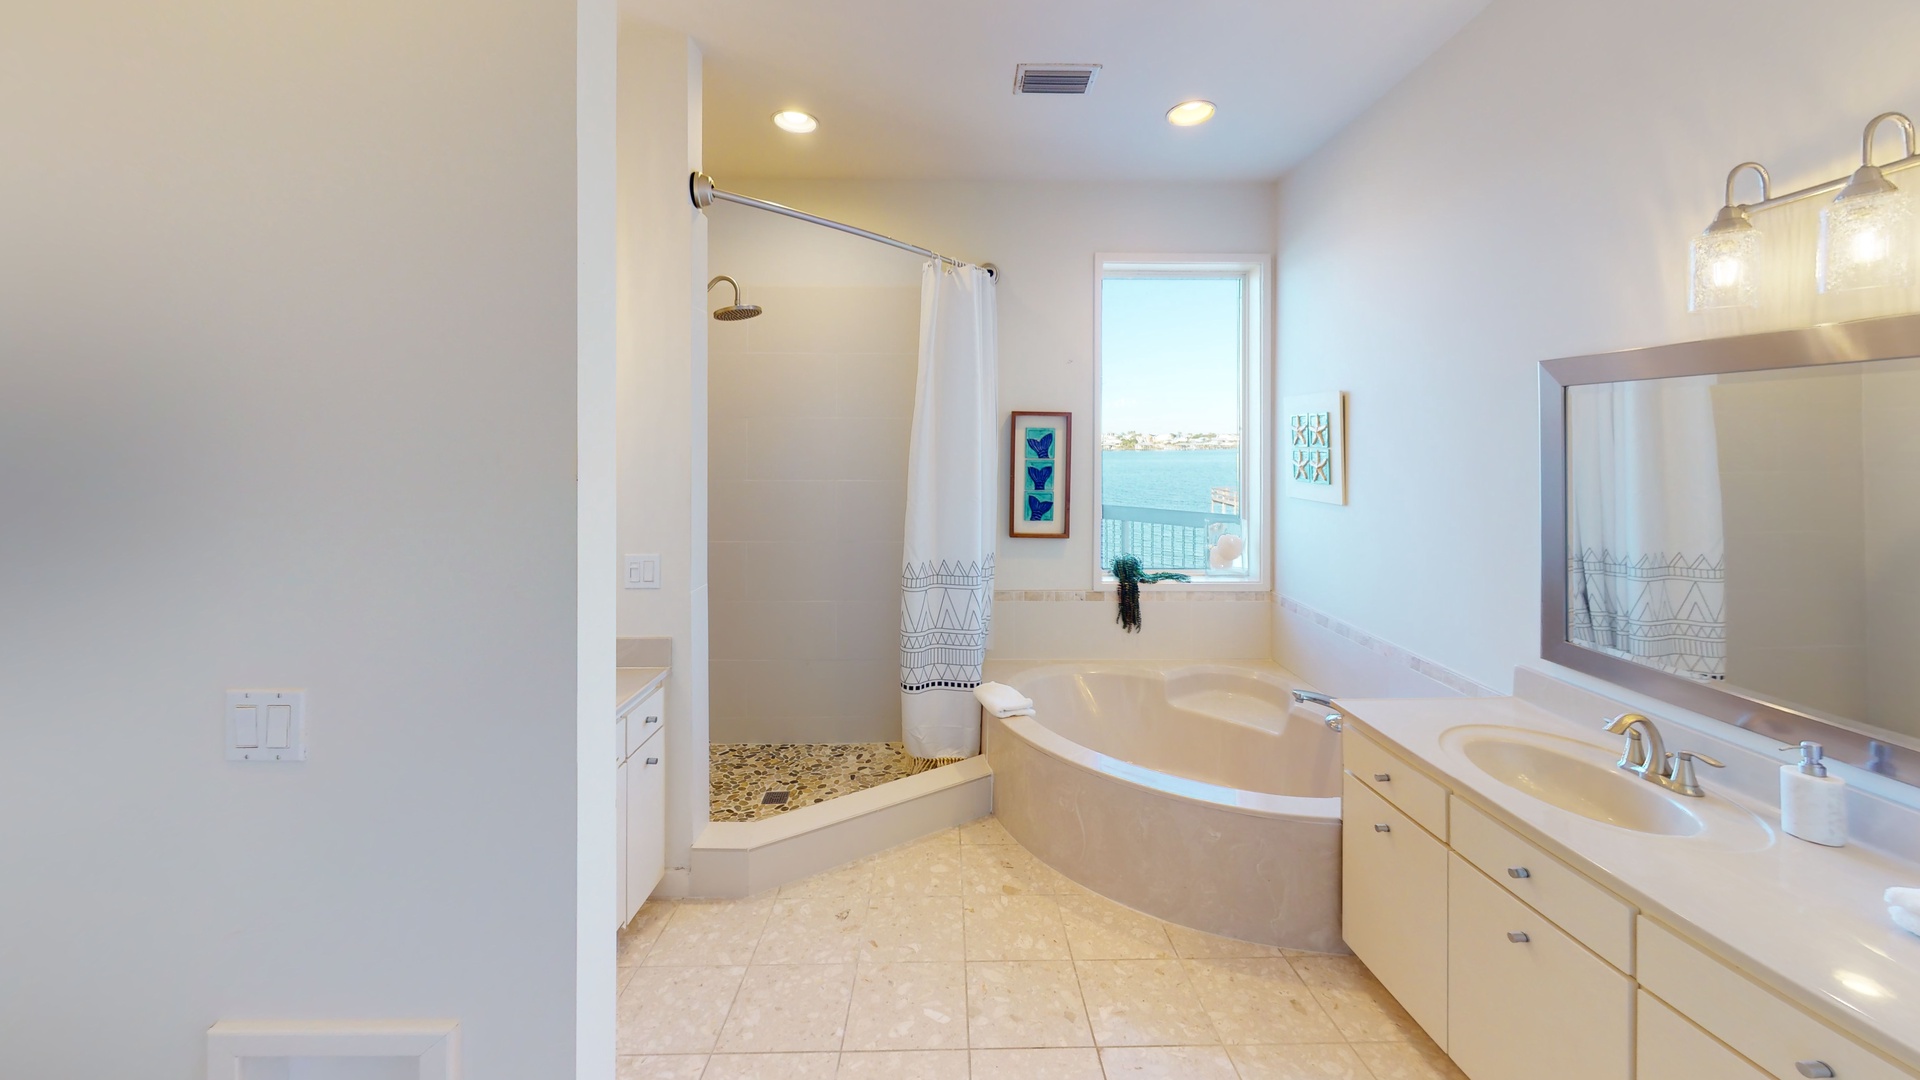 The private master bath features a garden tub and a walk-in shower